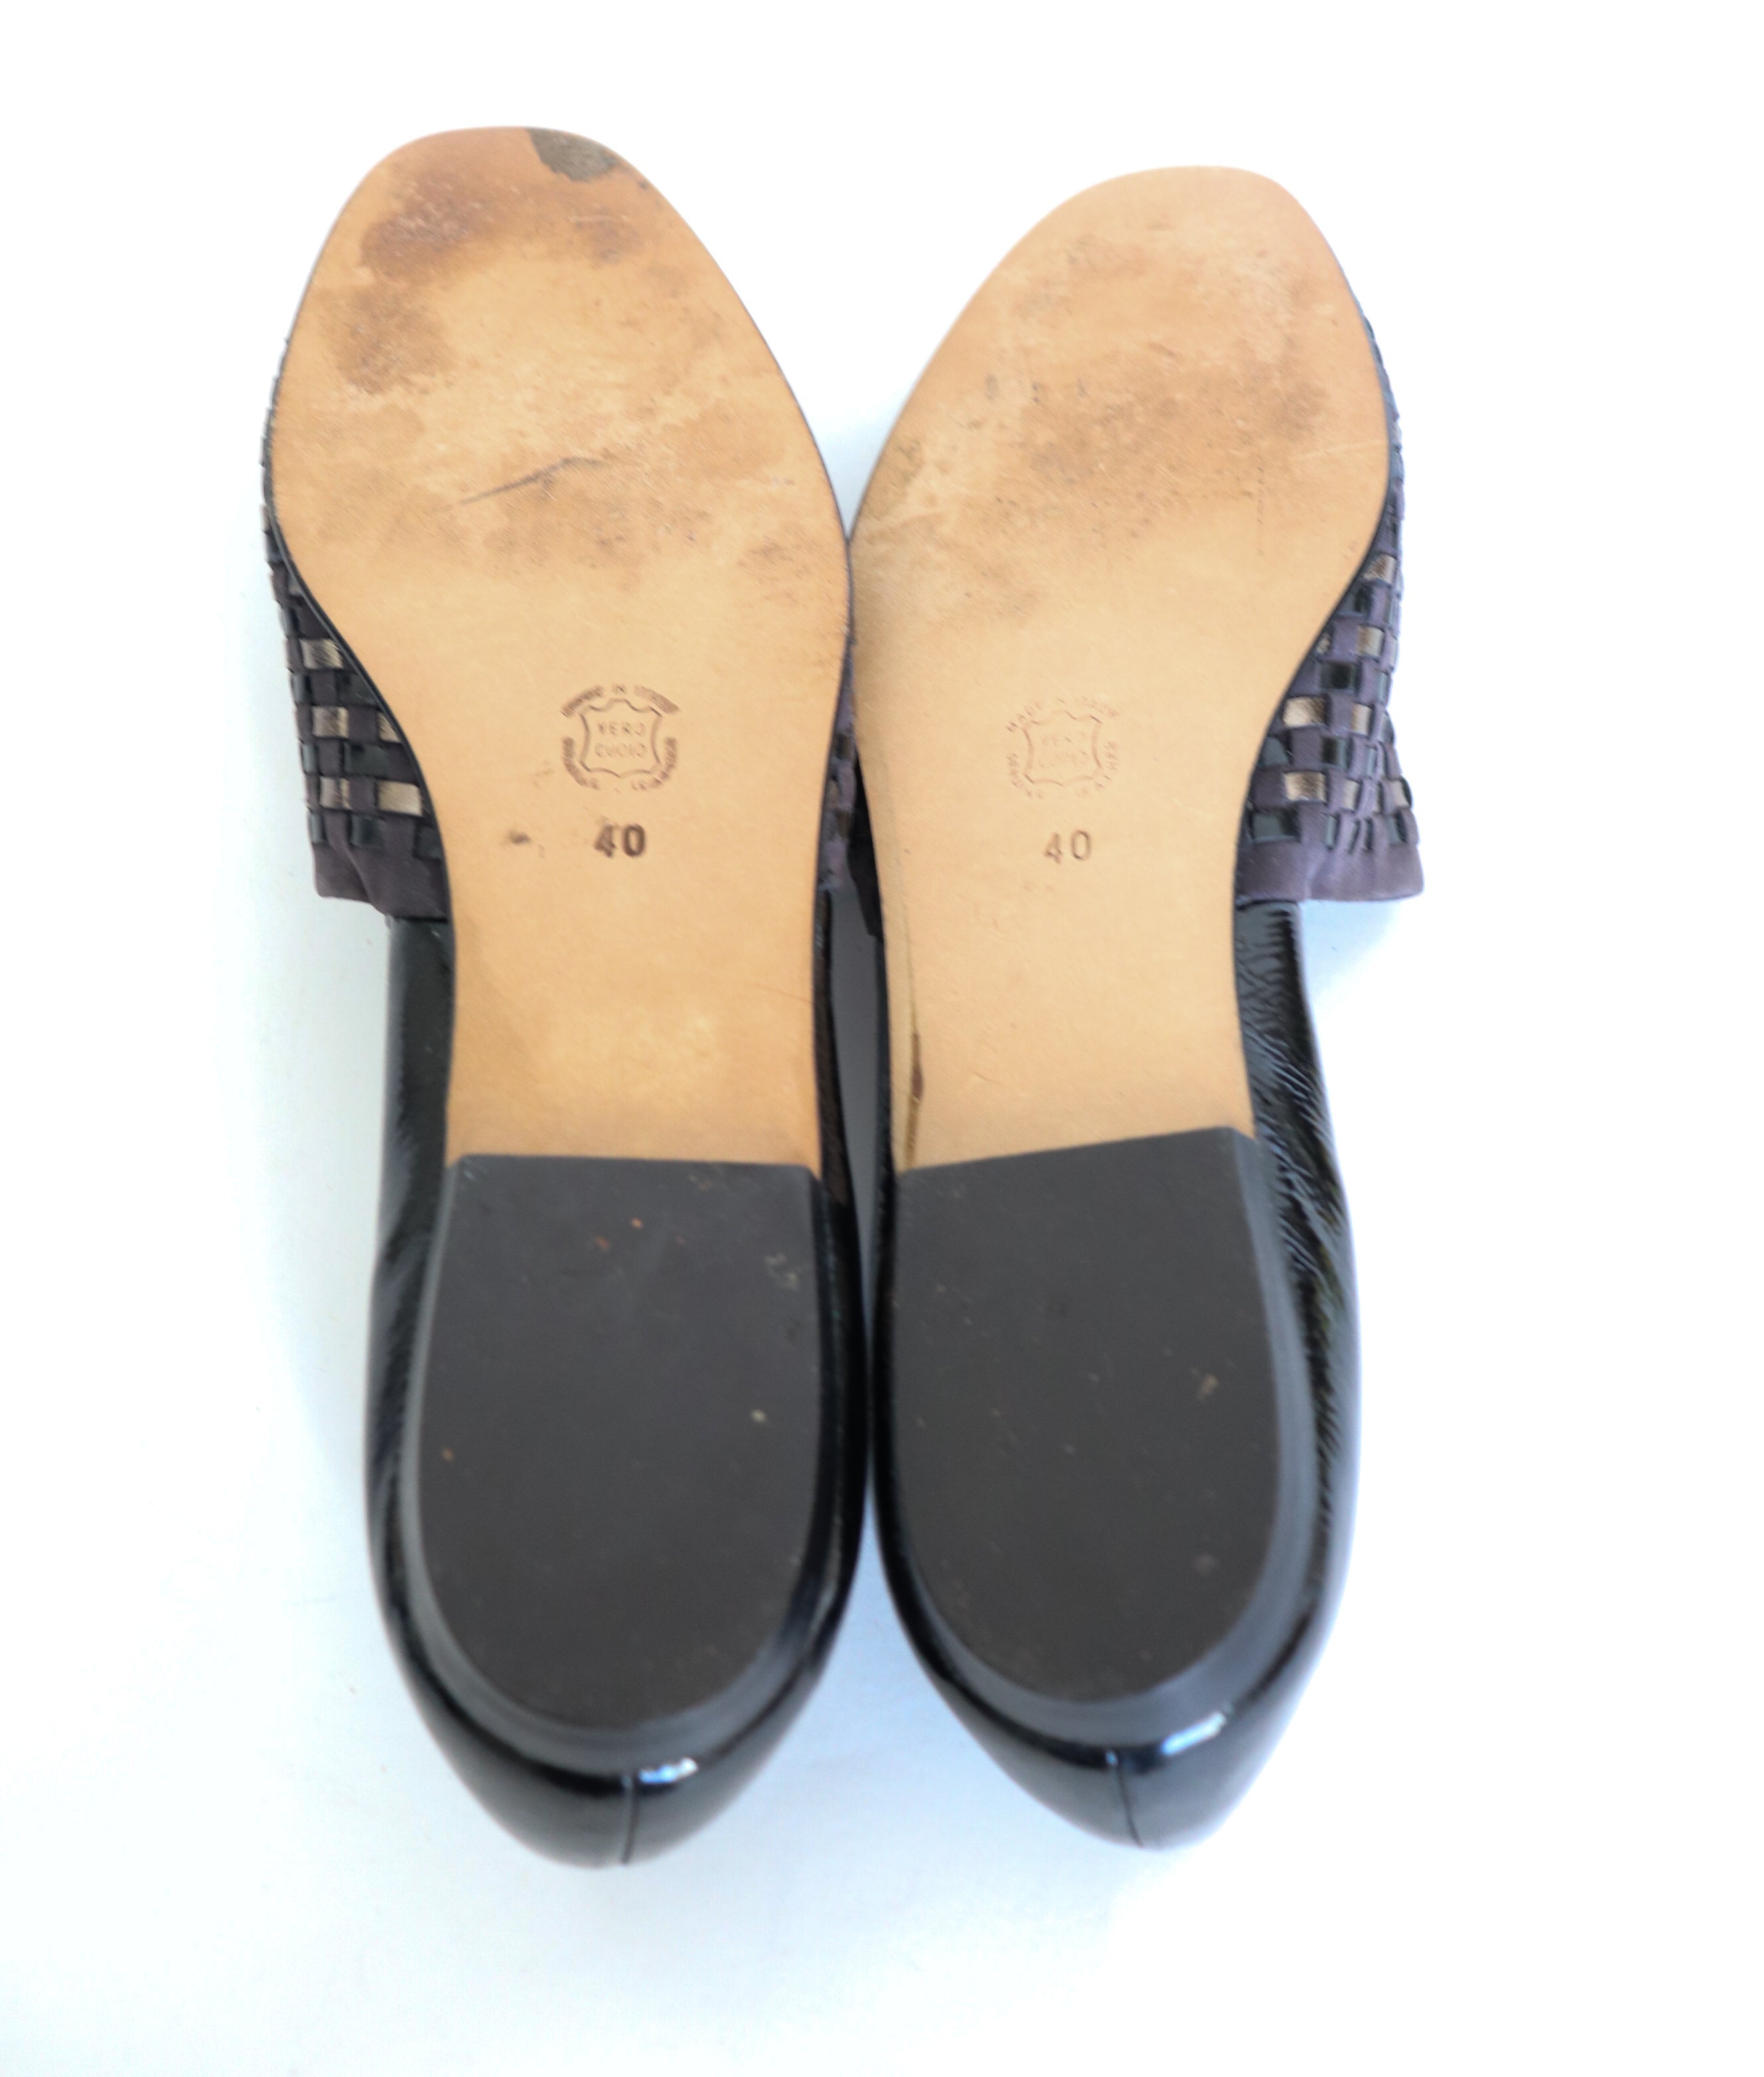 Vintage Woven Leather Flat Shoes -  Giulio Dallera - Label 40 ( Fit  39 / UK 6 )